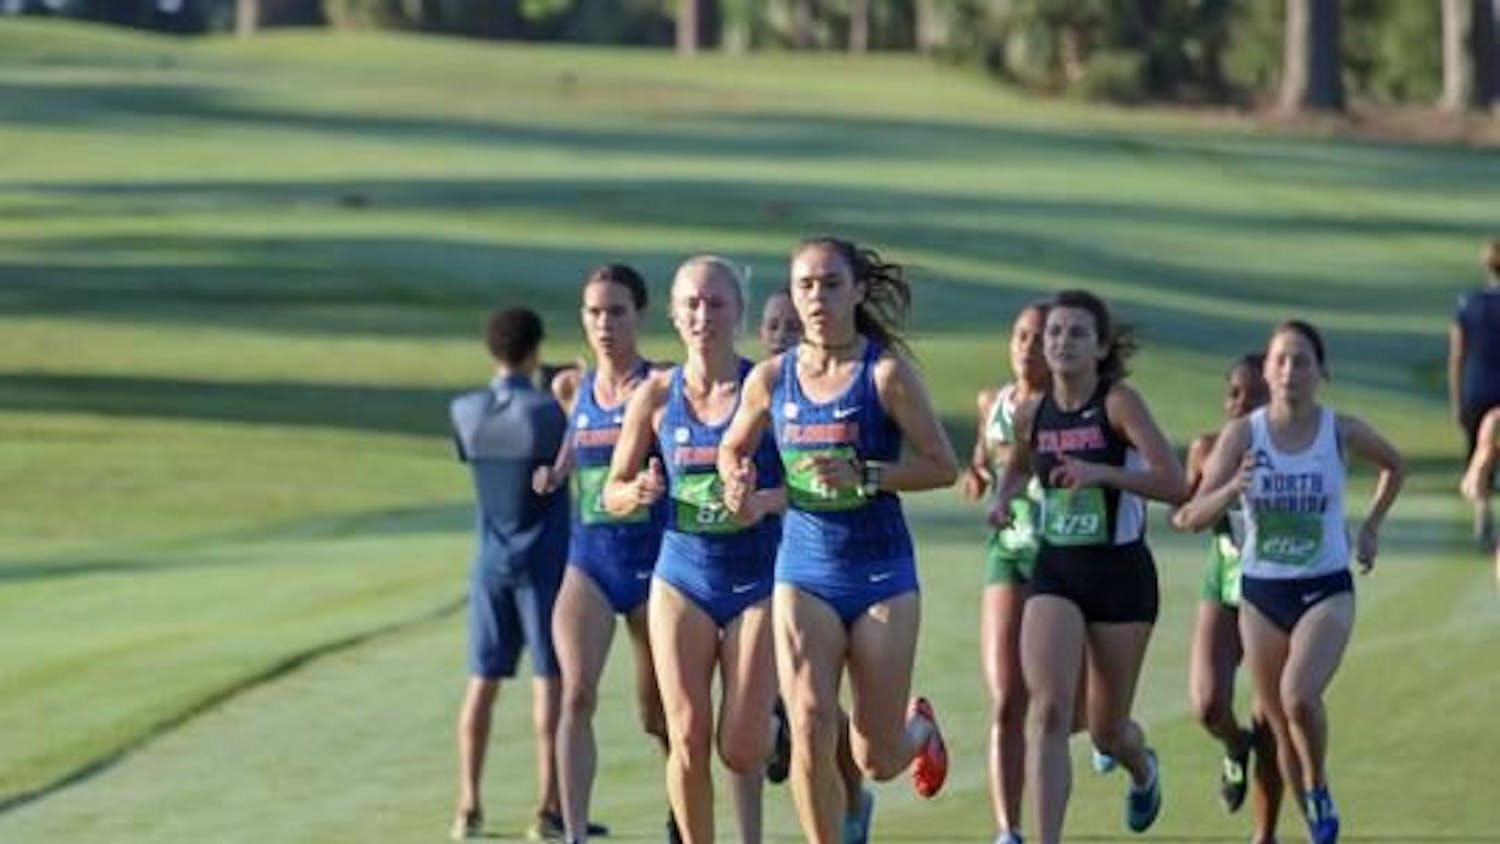 Both Gators squads finished in the top eight at the FSU Invitational Friday.